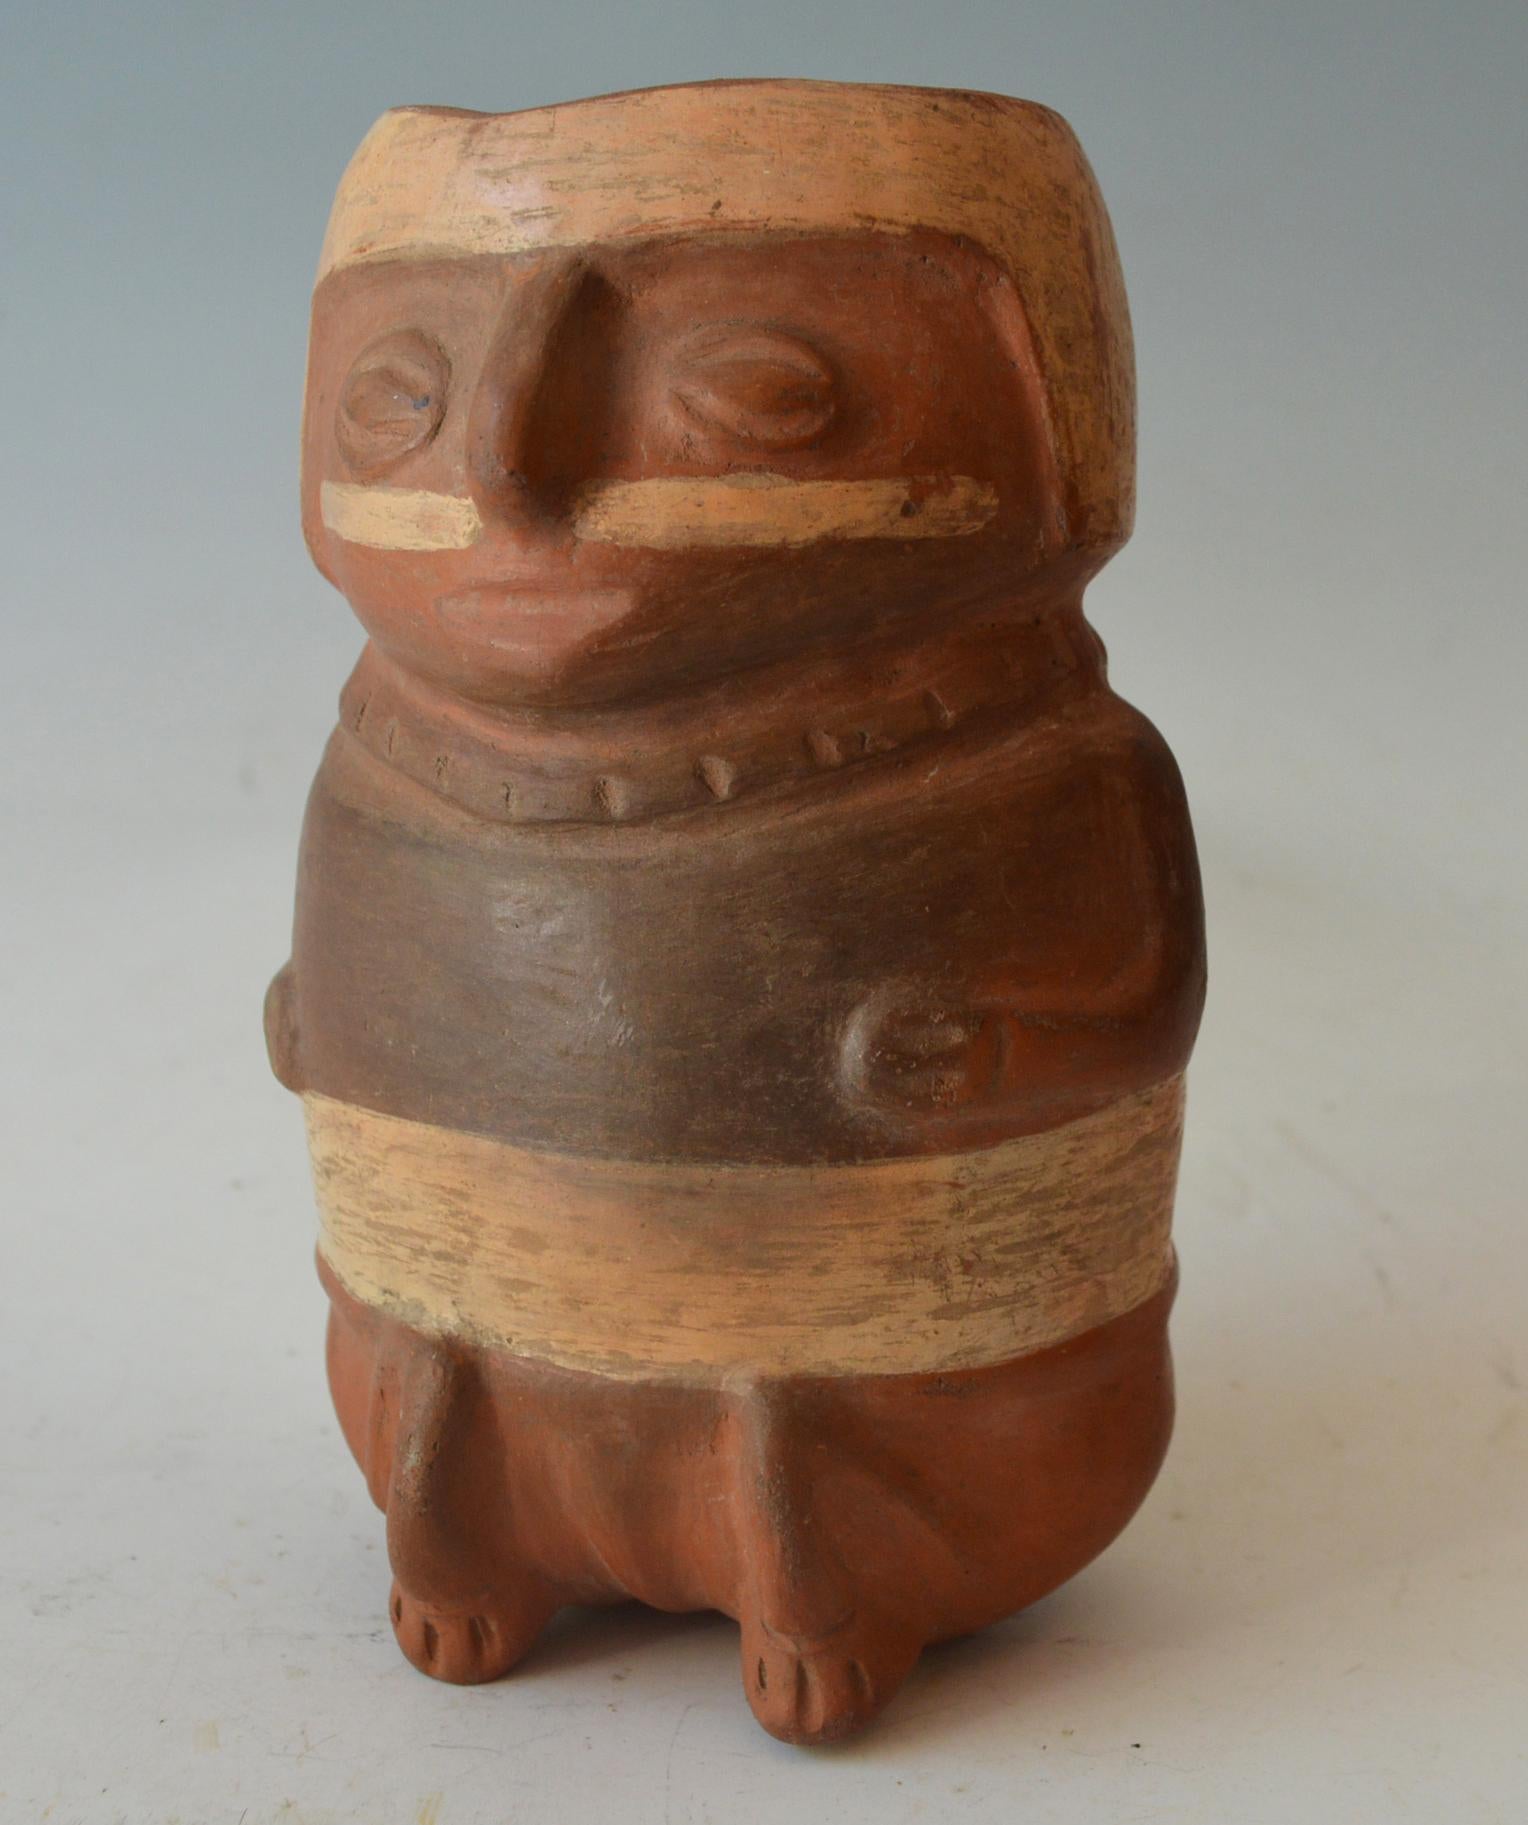 A Pre Columbian Moche vessel of a personage with a large nose ornament, sitting
with sublime expression probably representing a psychotropic induced state.
 Condition: Fine, collection numbers on back and base
Size height 18 cm,

Pre-Columbian,